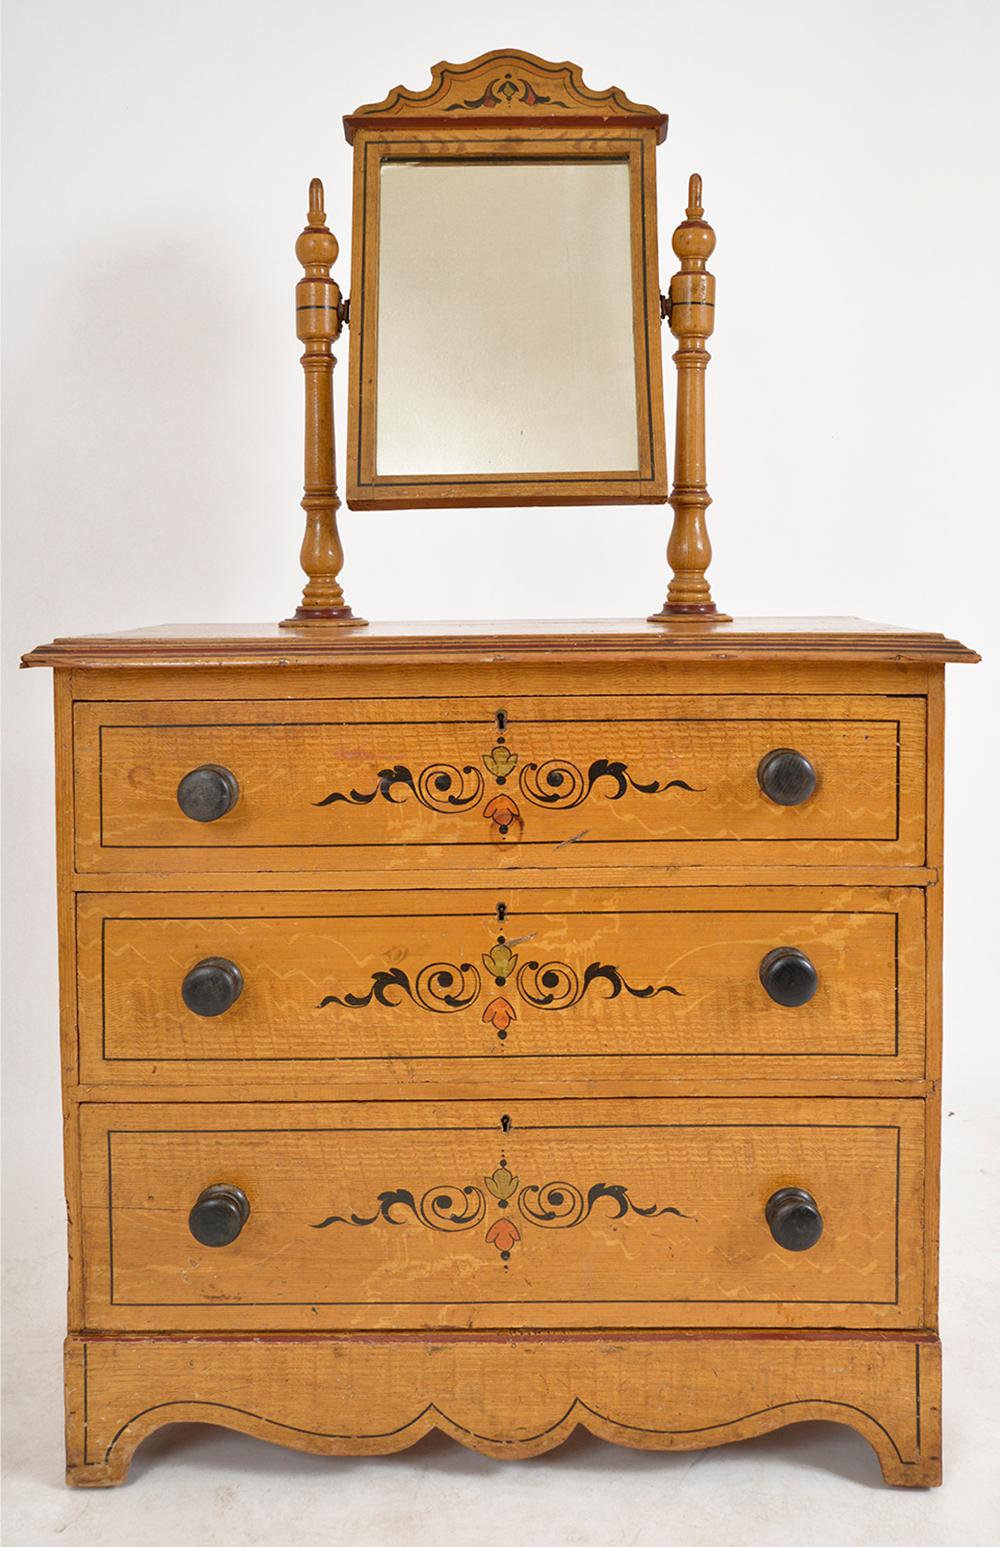 British Antique English Painted Chest Of Drawers Dressing Table Scumbled Folk Art  For Sale